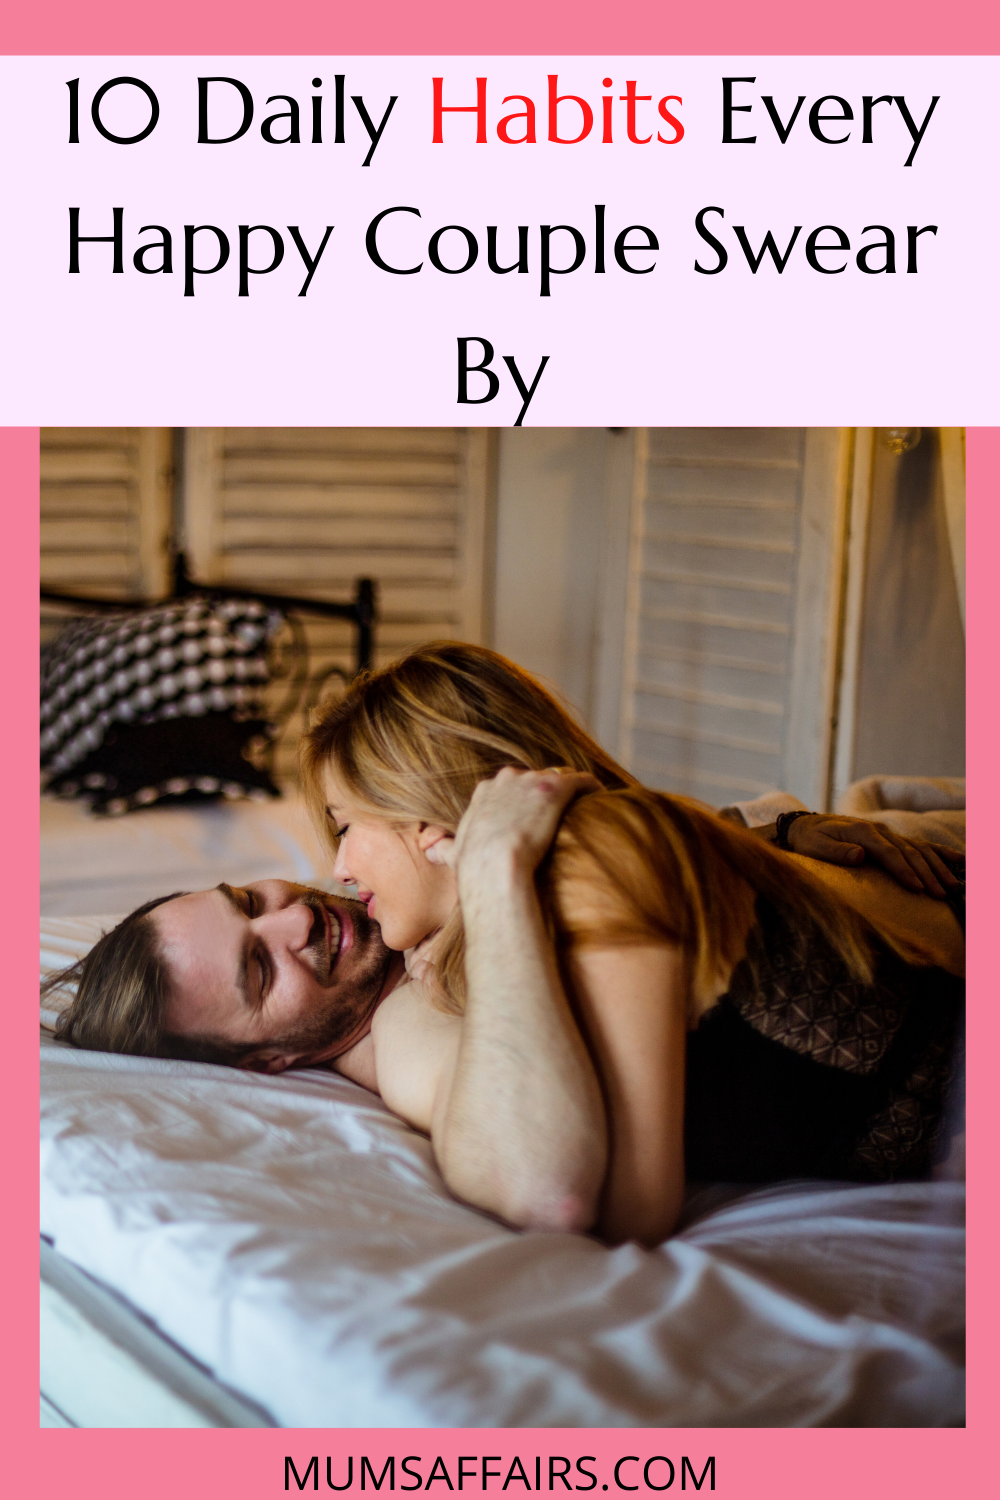 Daily Bedroom Habits That Happy Couples Swear By